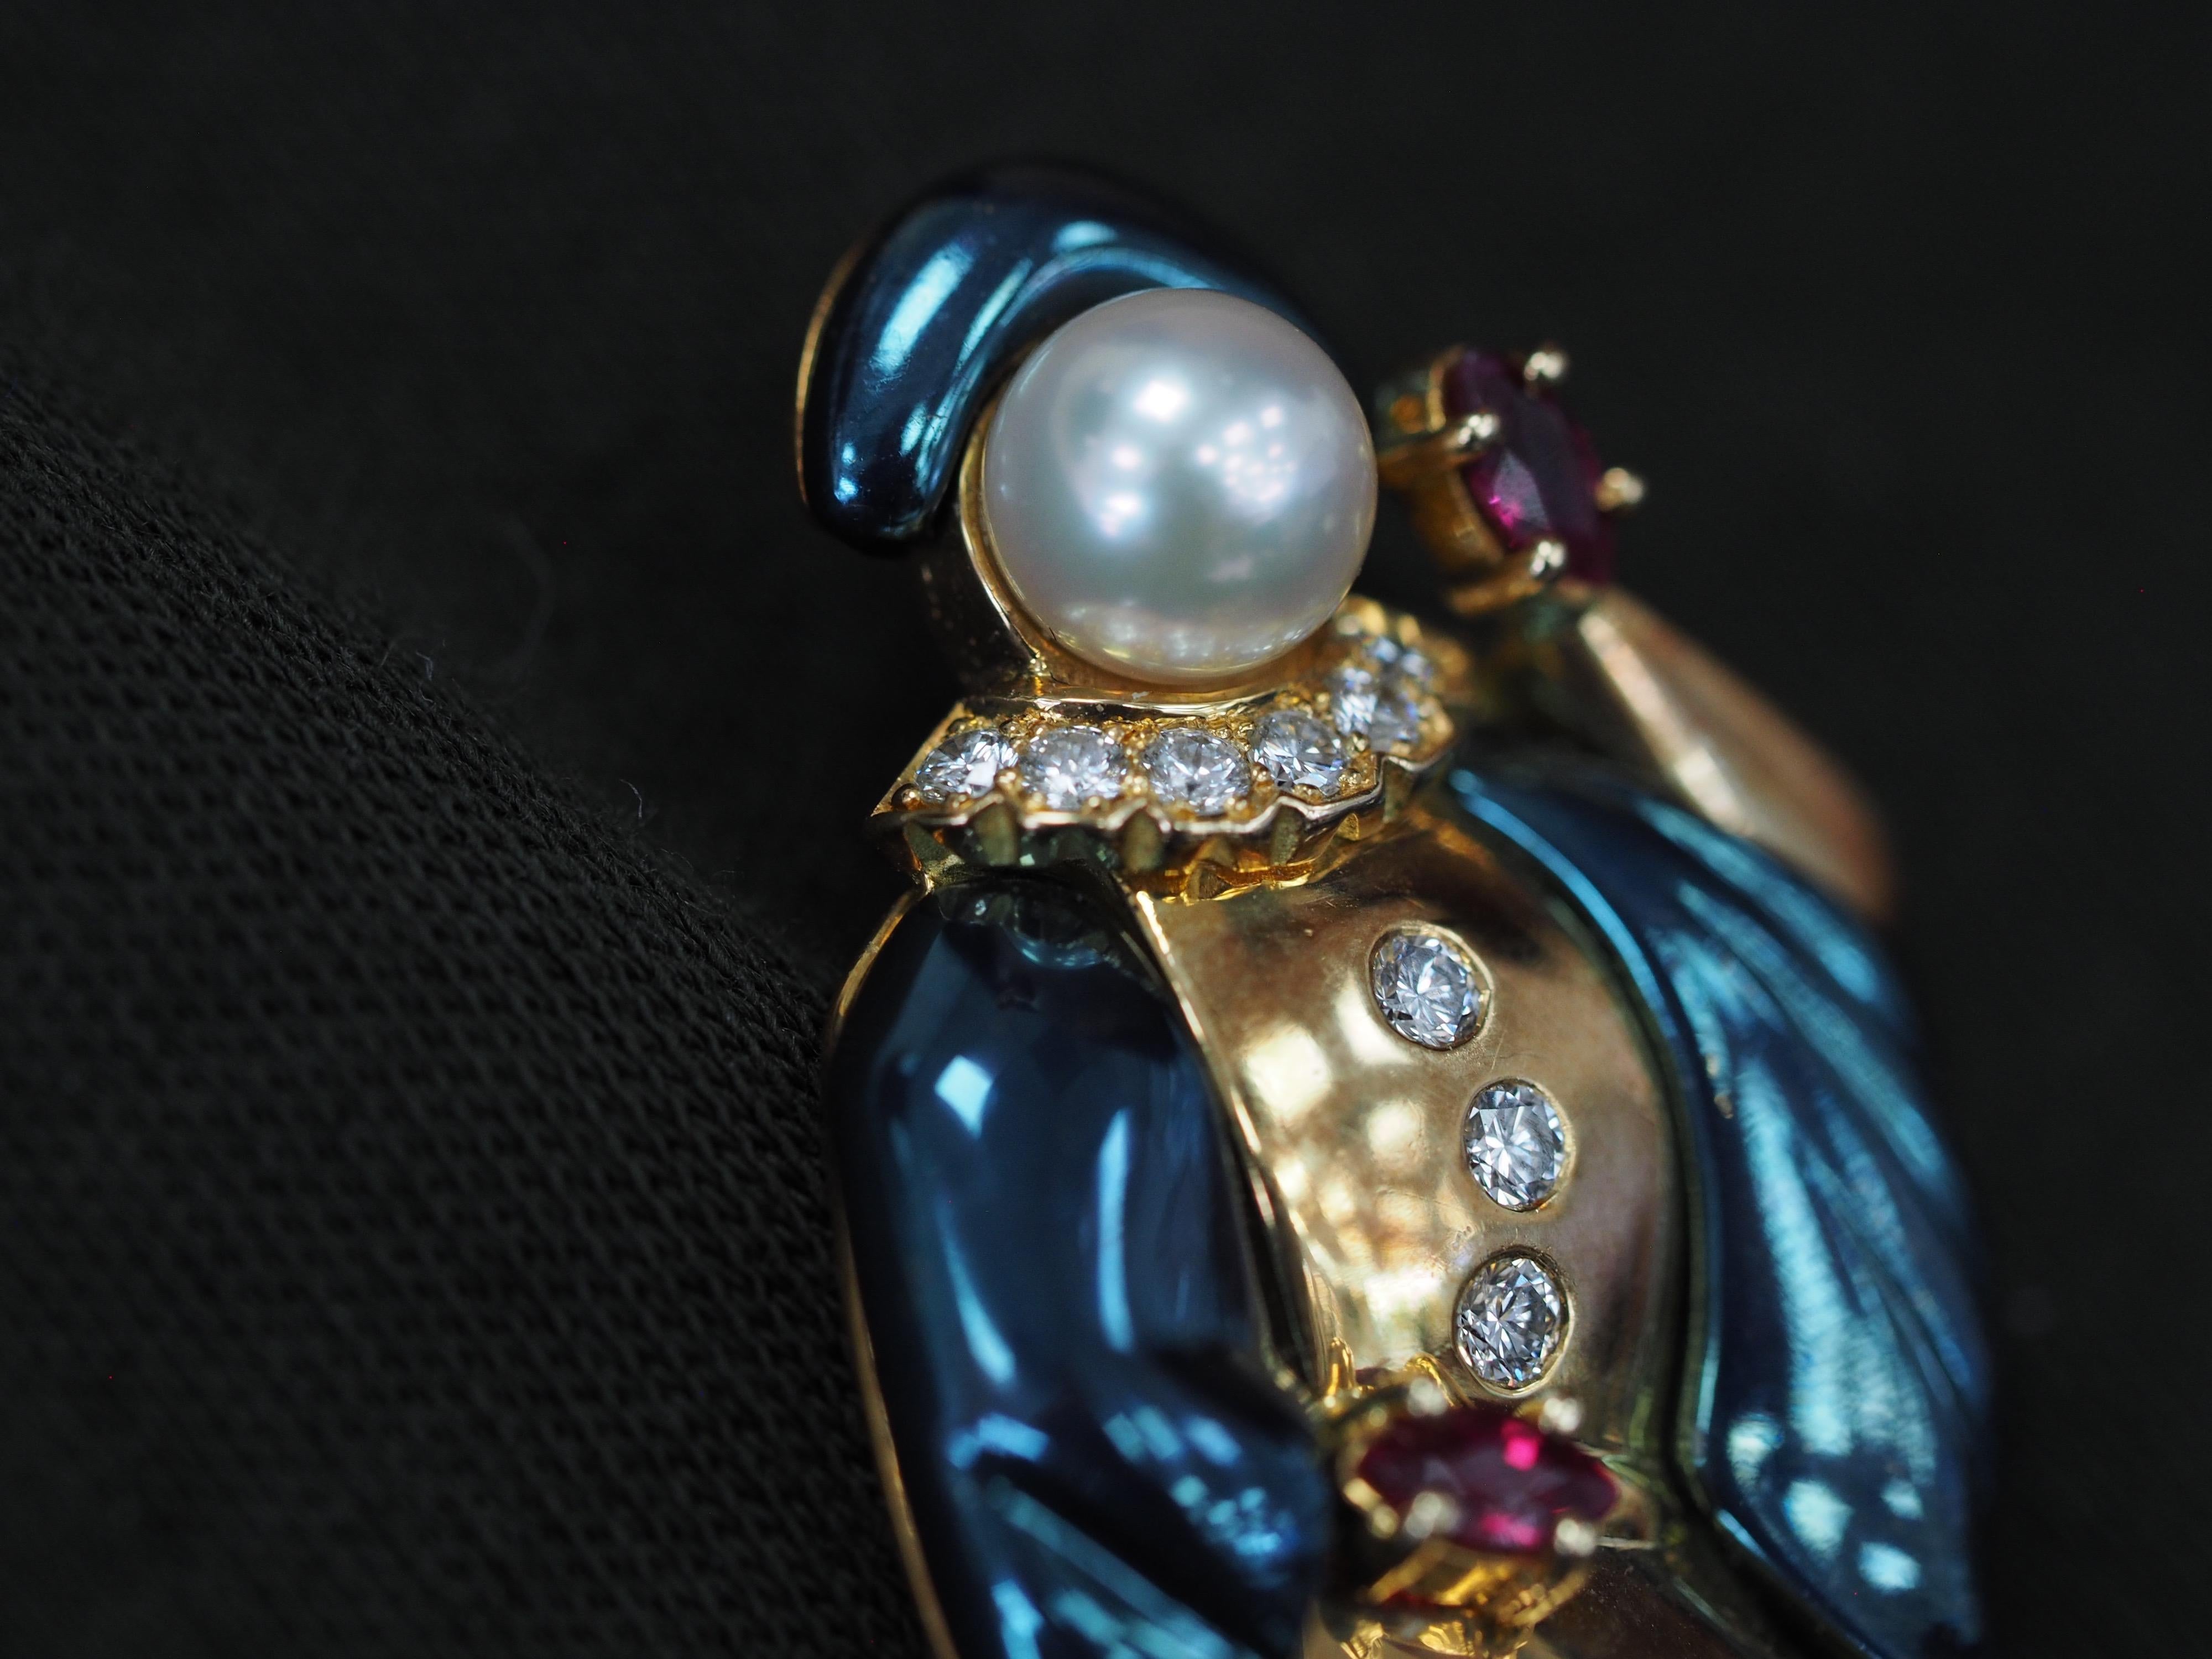 Ludwig Müller 18 Karat Blue Gold Brooch with Diamonds, Rubies and Pearls 3